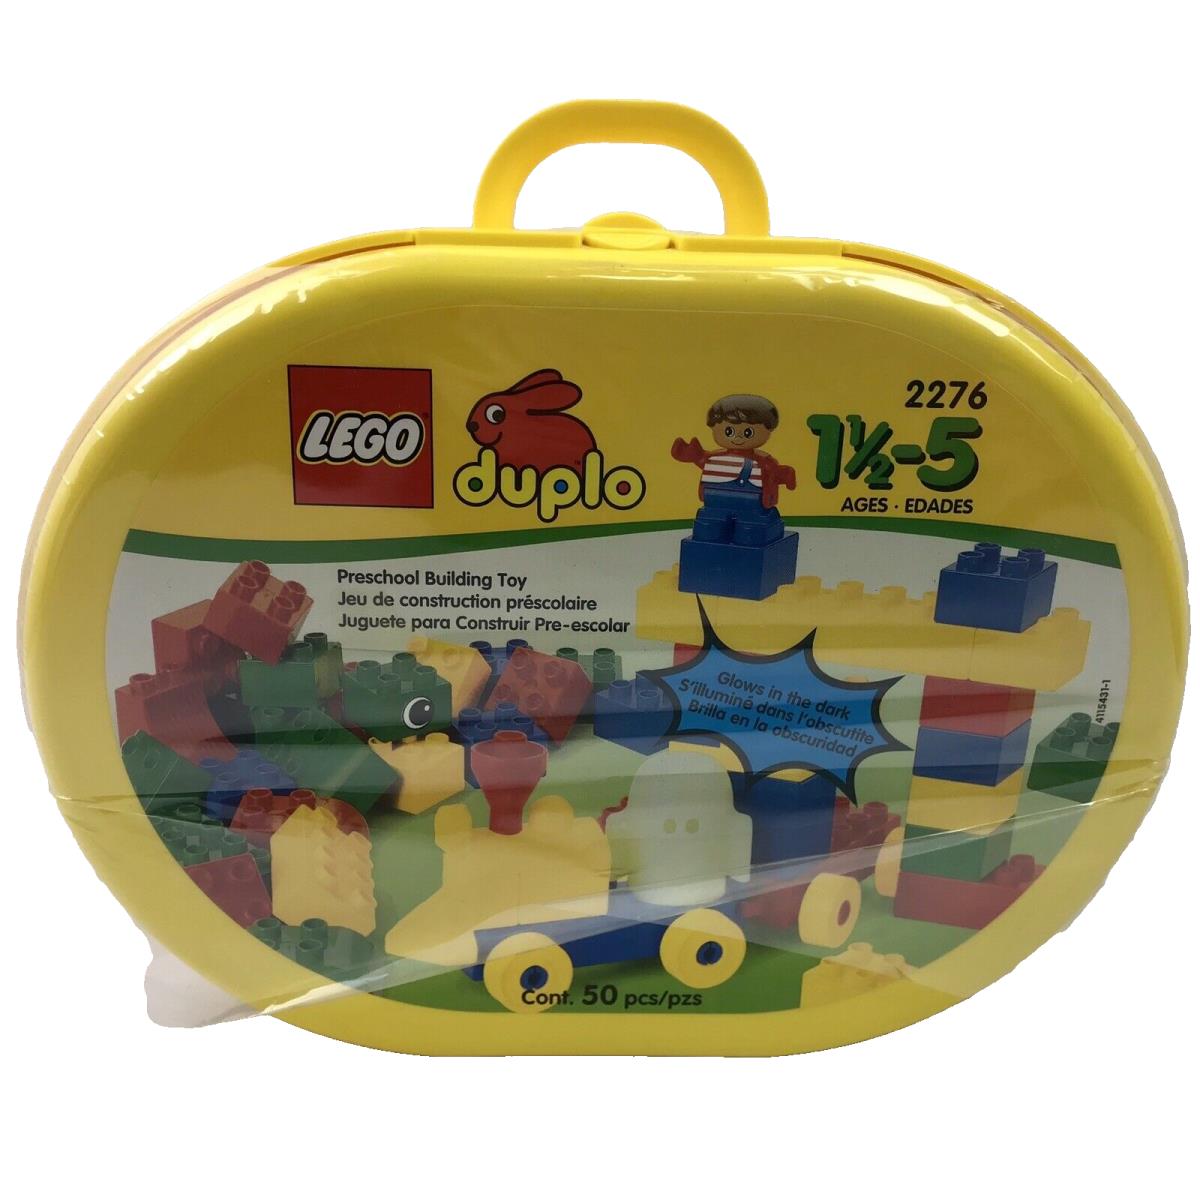 Lego Duplo Building Set 2276 Train Glow in The Dark Ghost Carry Case